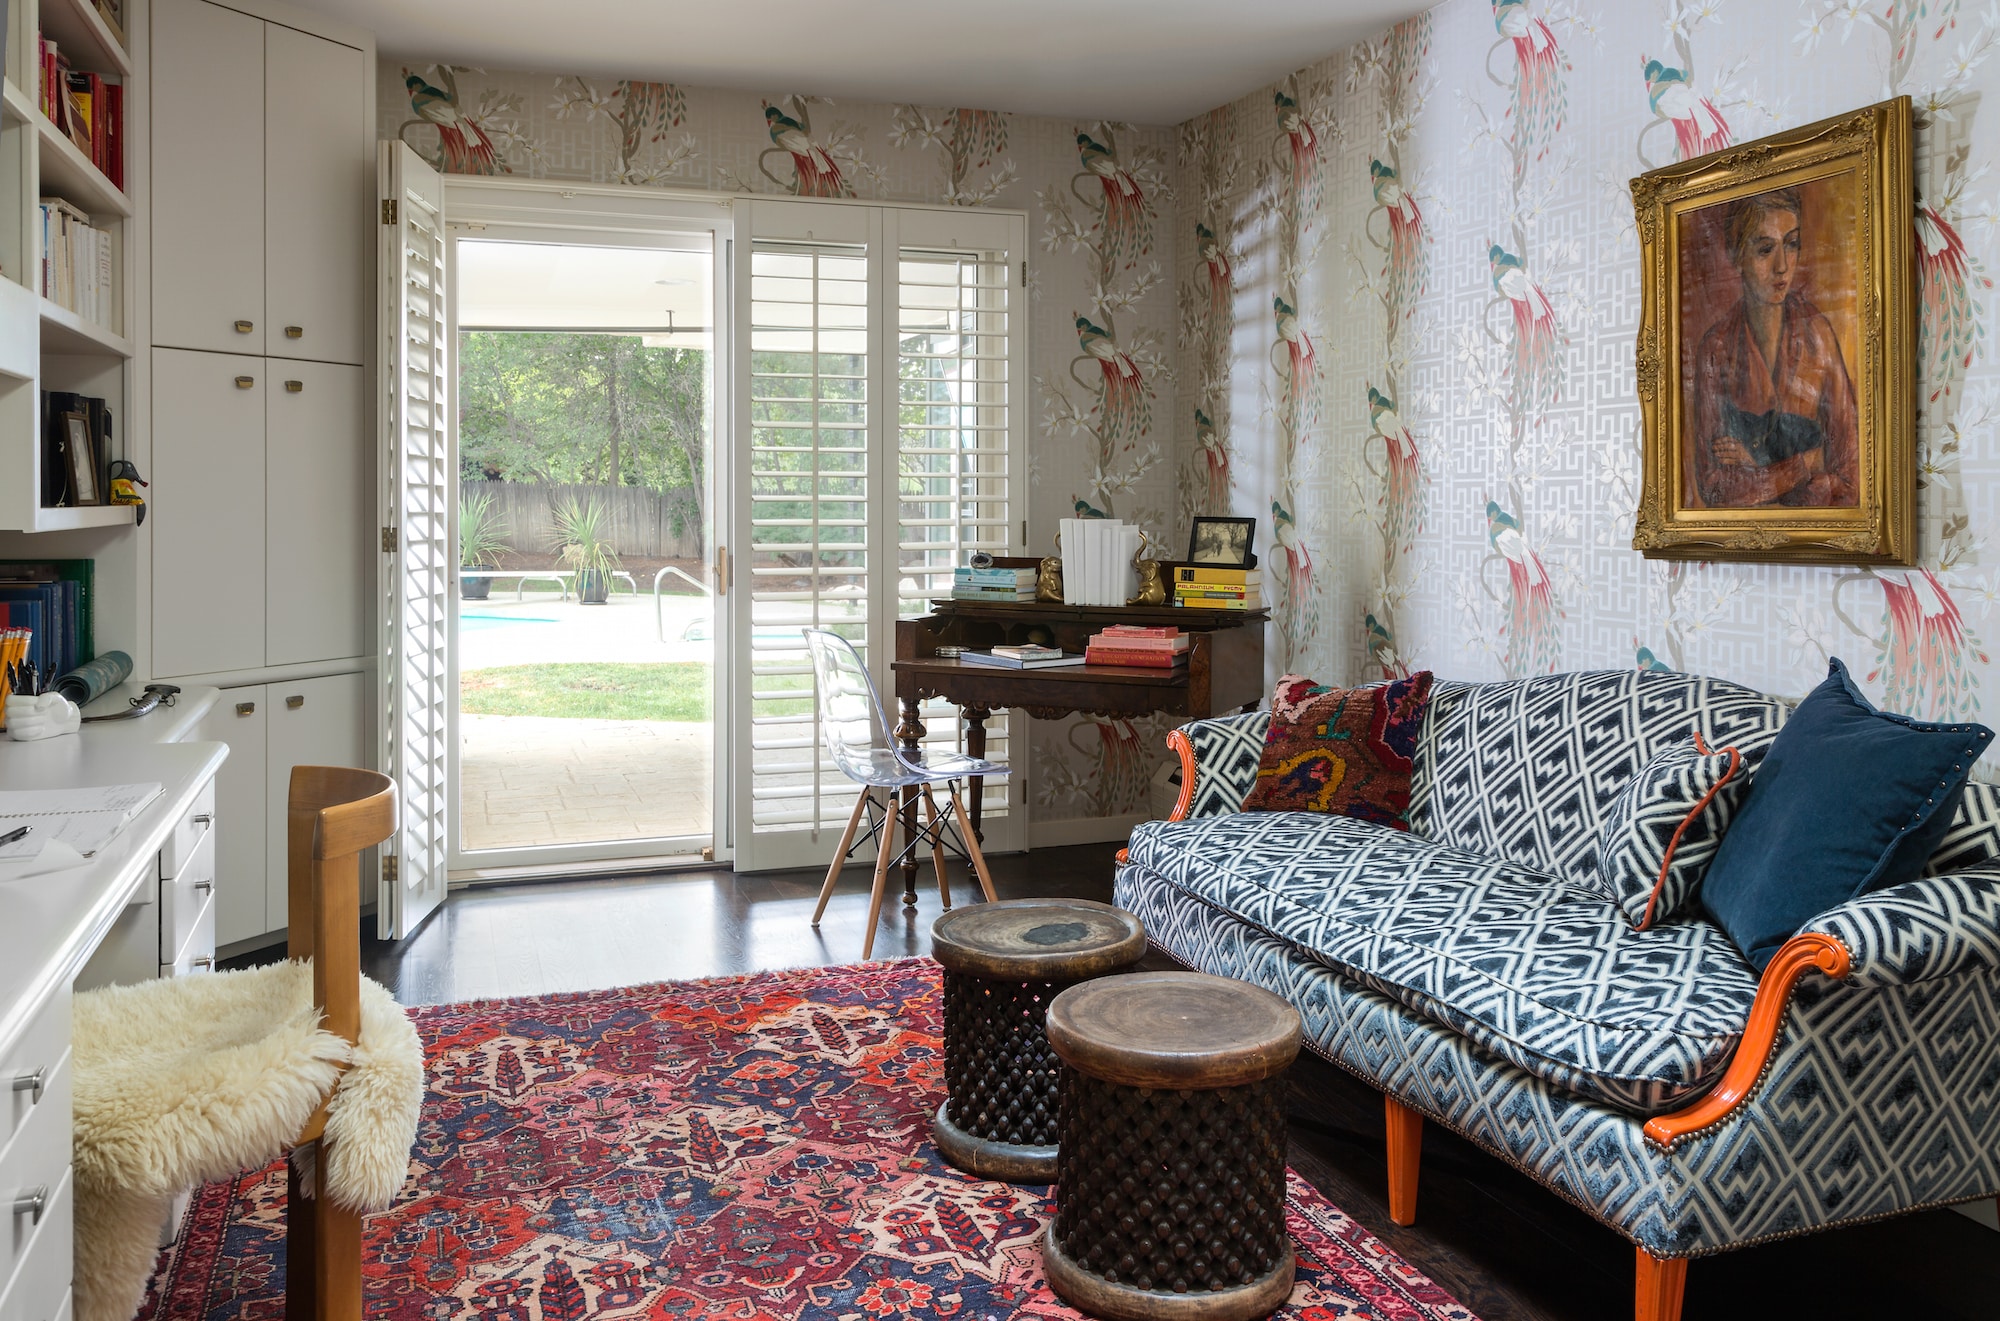 Andrea Schumacher’s own study in Bow Mar, Colorado, holds true to her curated-over-time philosophy, filled with pieces and moments that she’s collected over the years. Here, she followed her rule of three with Nina Campbell’s whimsical Paradiso wallcovering, a modern geometric print on the sofa and a vintage Kurdish rug. Photo by Emily Minton Redfield